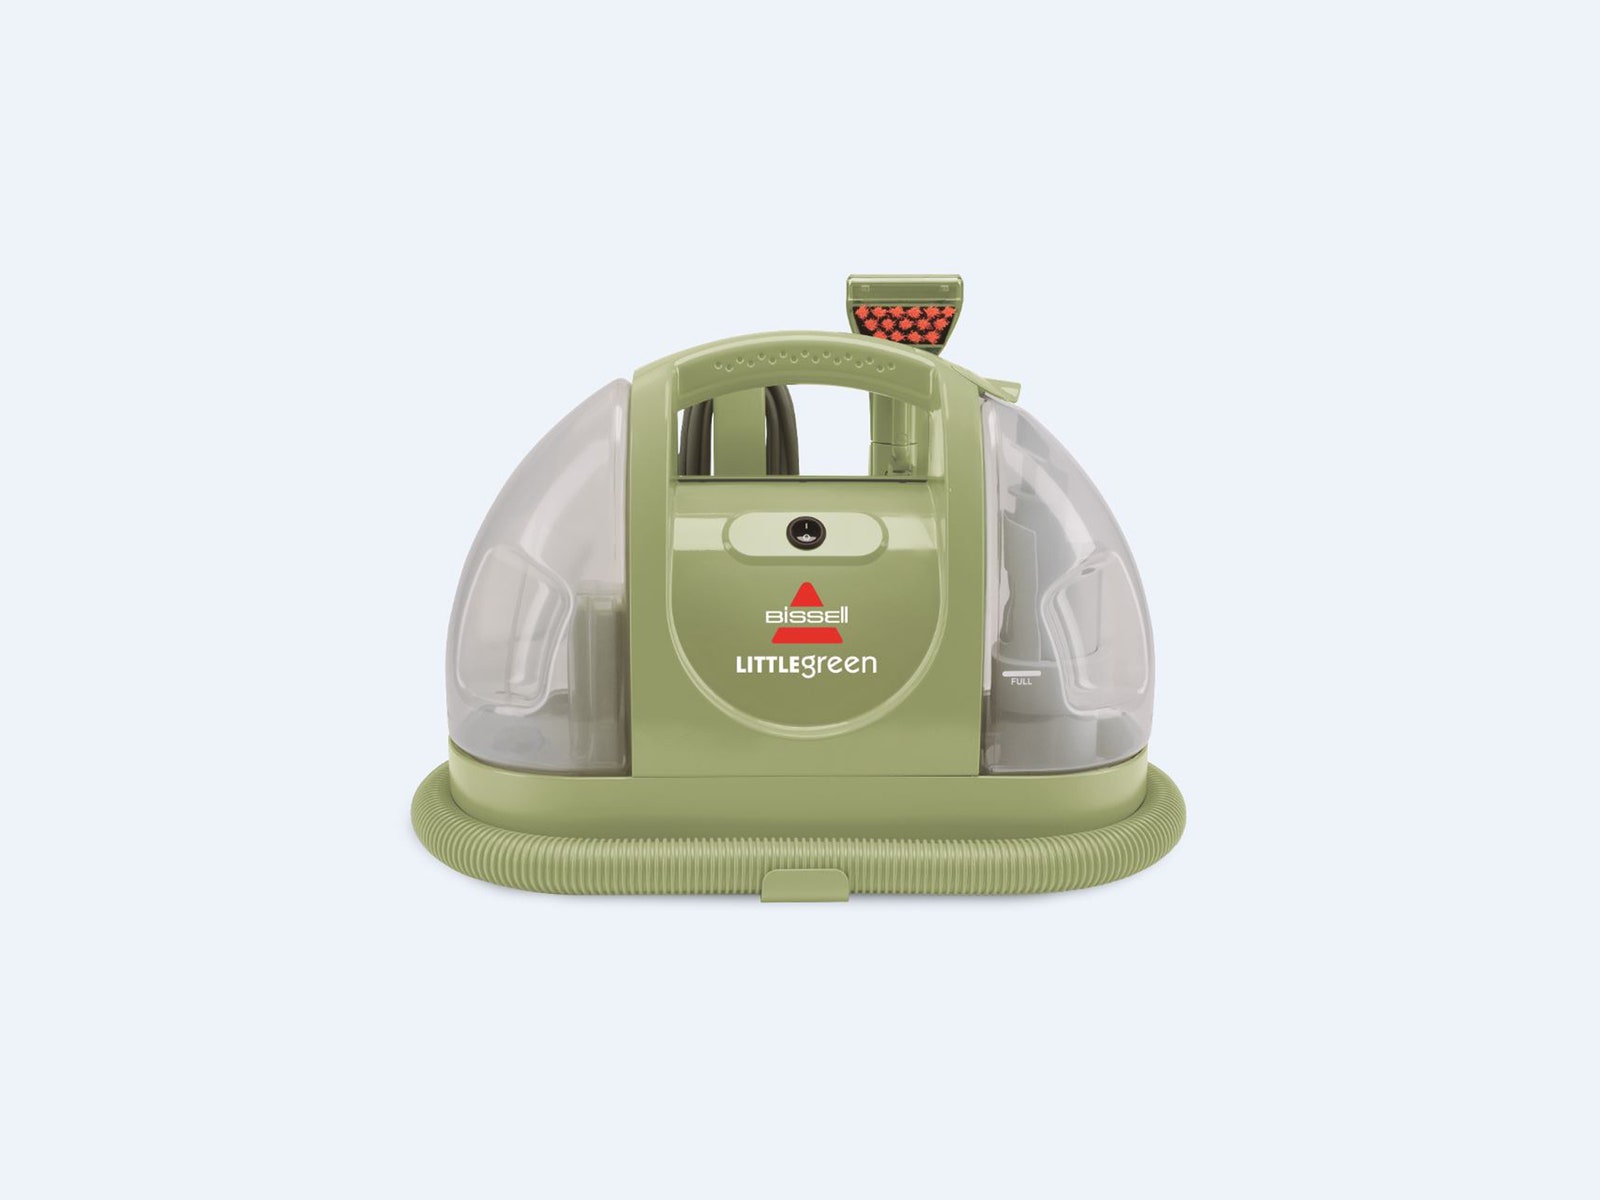 Bissell Little Green vacuum